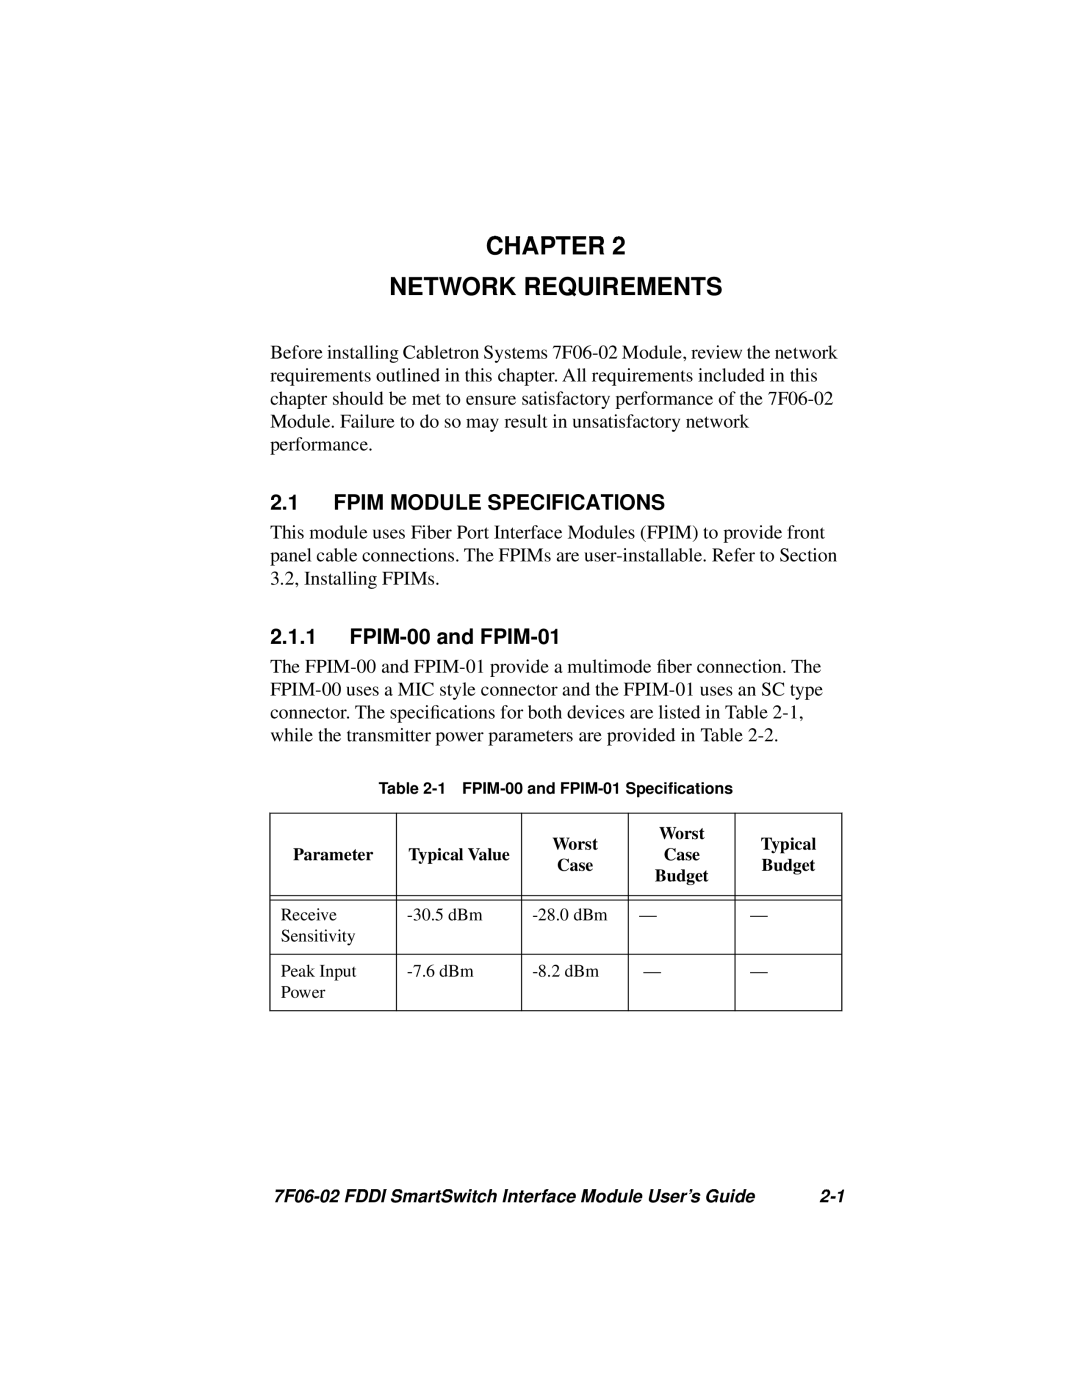 Cabletron Systems FDDI manual Chapter Network Requirements, Fpim Module Specifications, FPIM-00 and FPIM-01 